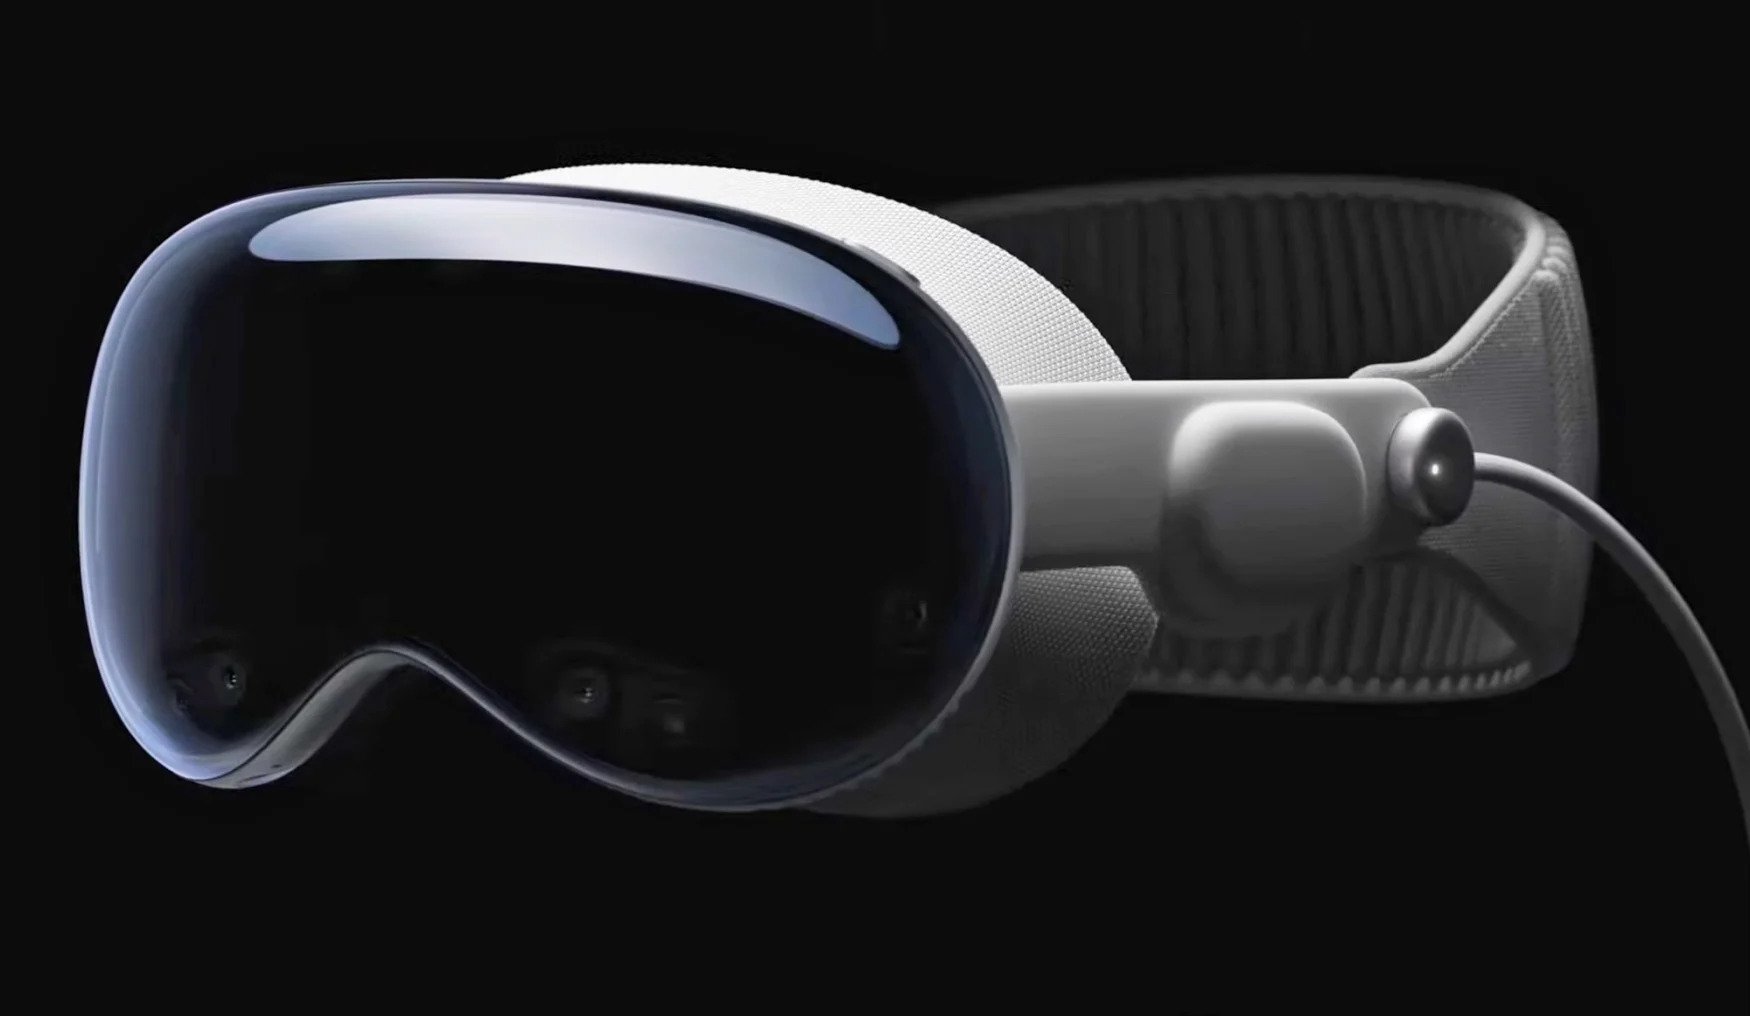 Vision Pro headset has the form of ski goggles connected to an external battery pack via cable